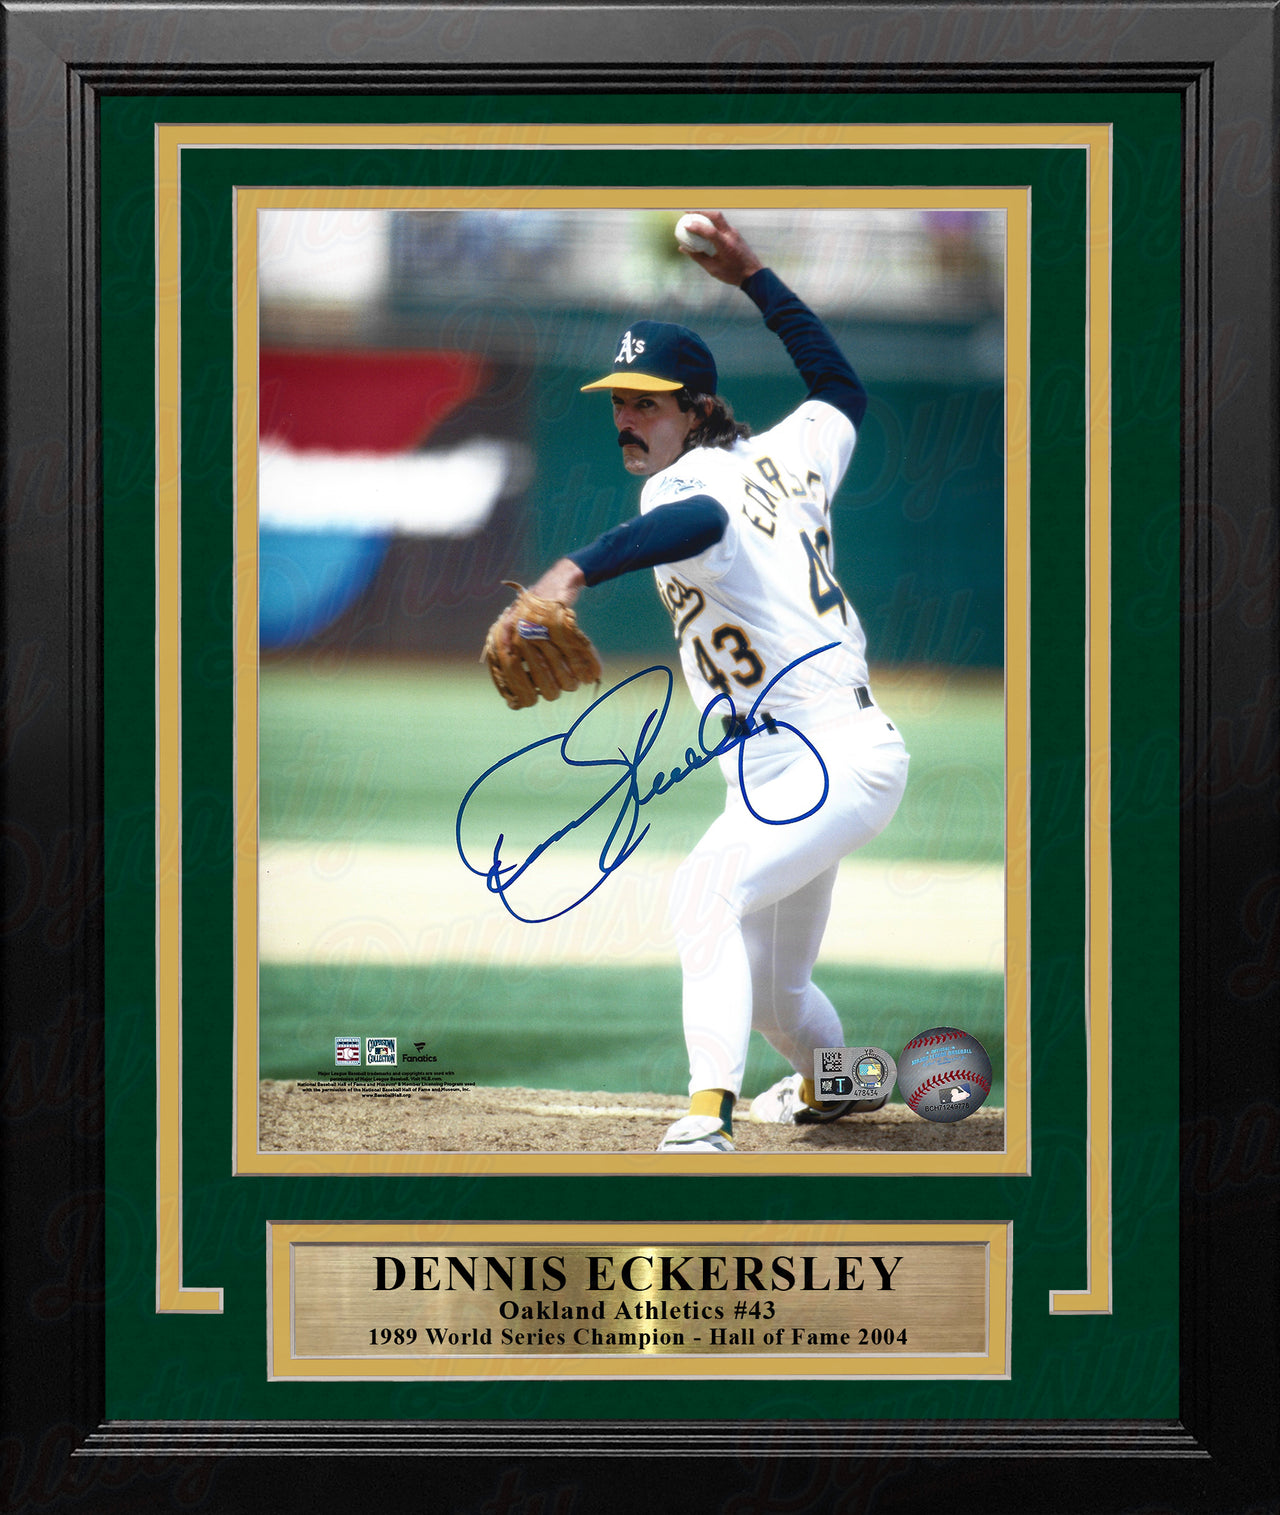 Dennis Eckersley in Action Oakland Athletics Autographed 8" x 10" Framed Baseball Photo - Dynasty Sports & Framing 